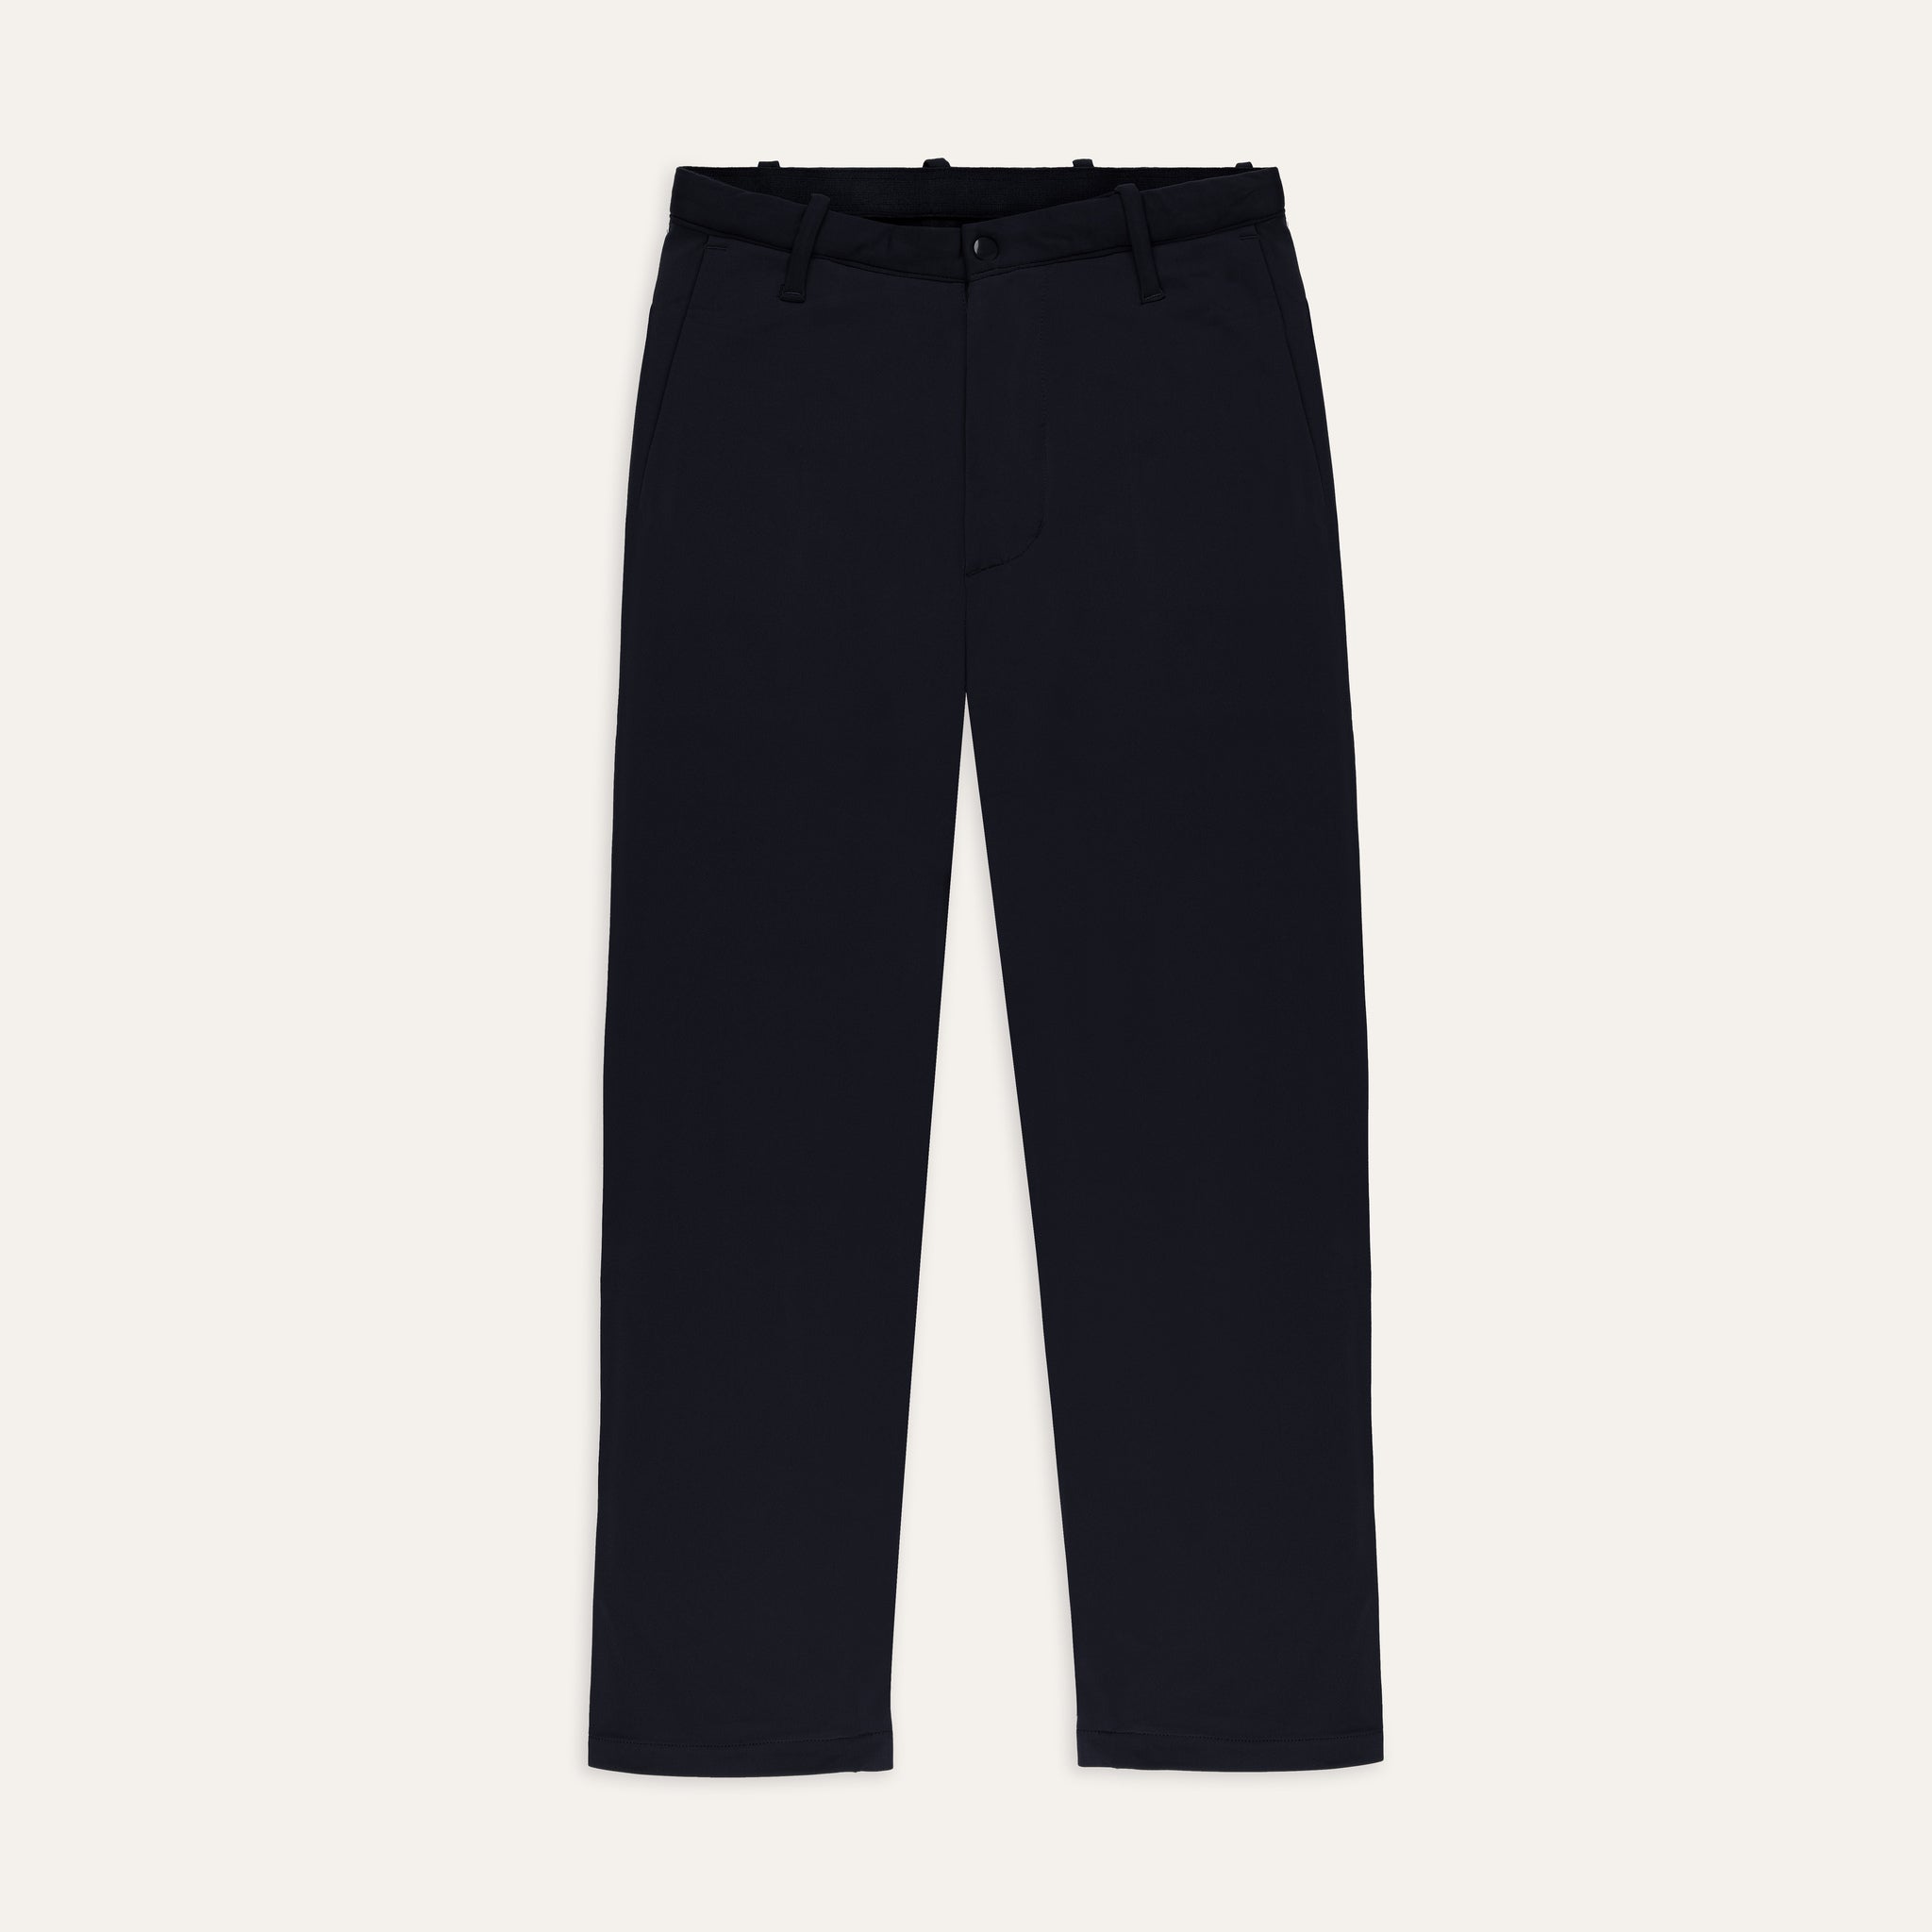 All-Time Pant - Black – WearVistal